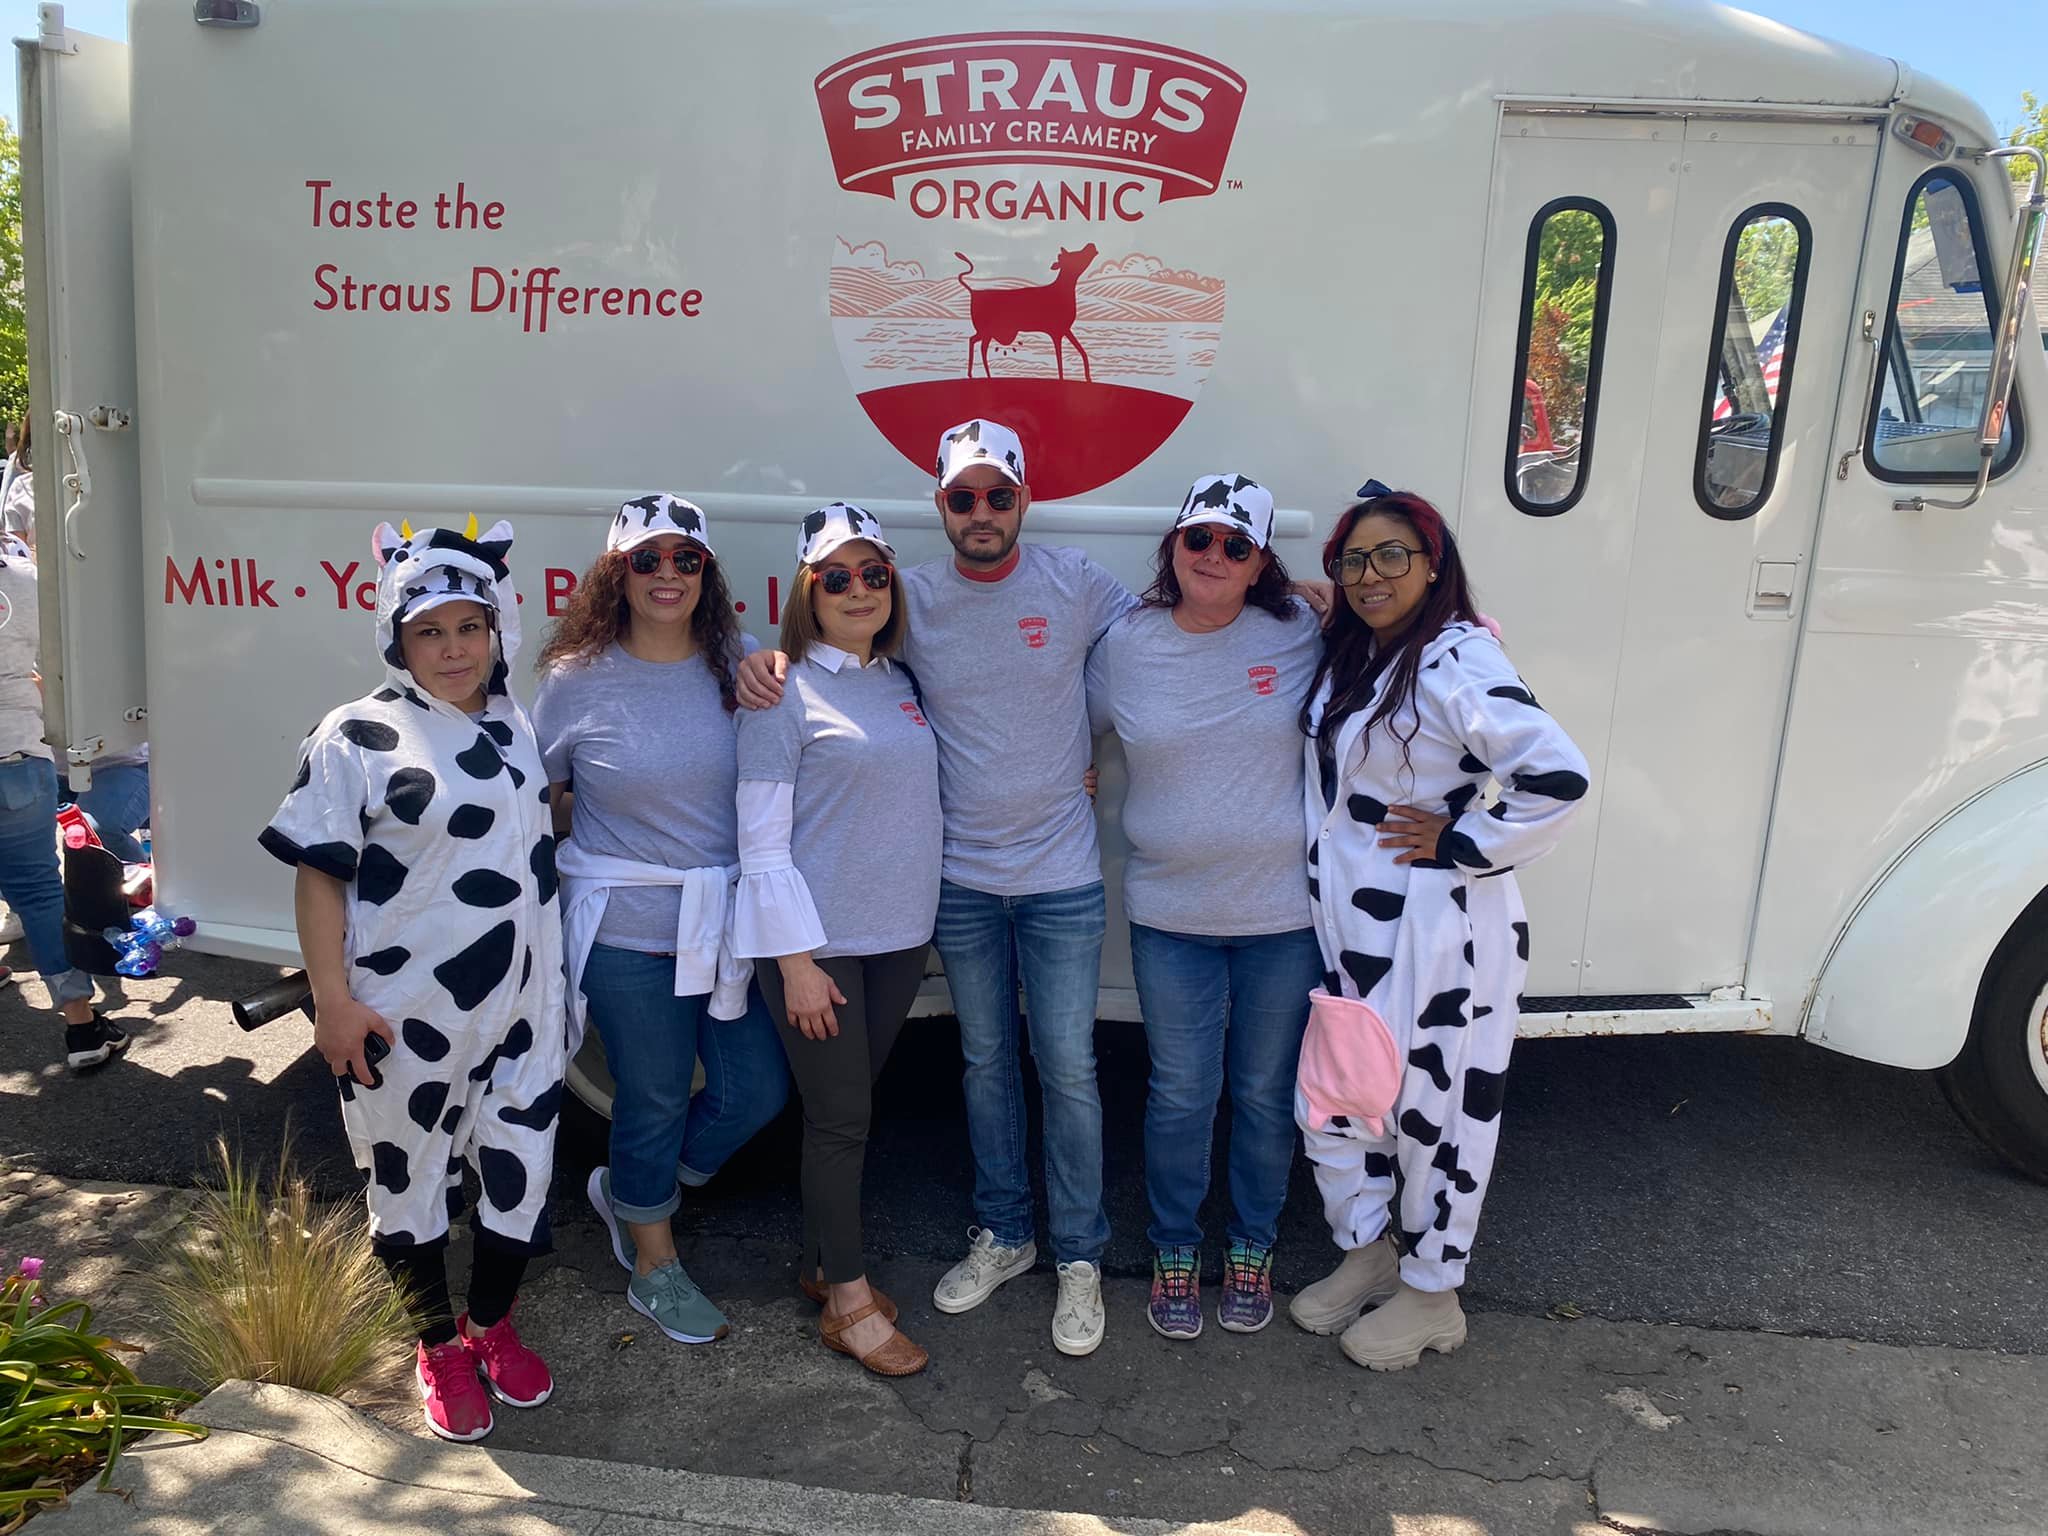 group photo in front of straus family creamery ice cream truck